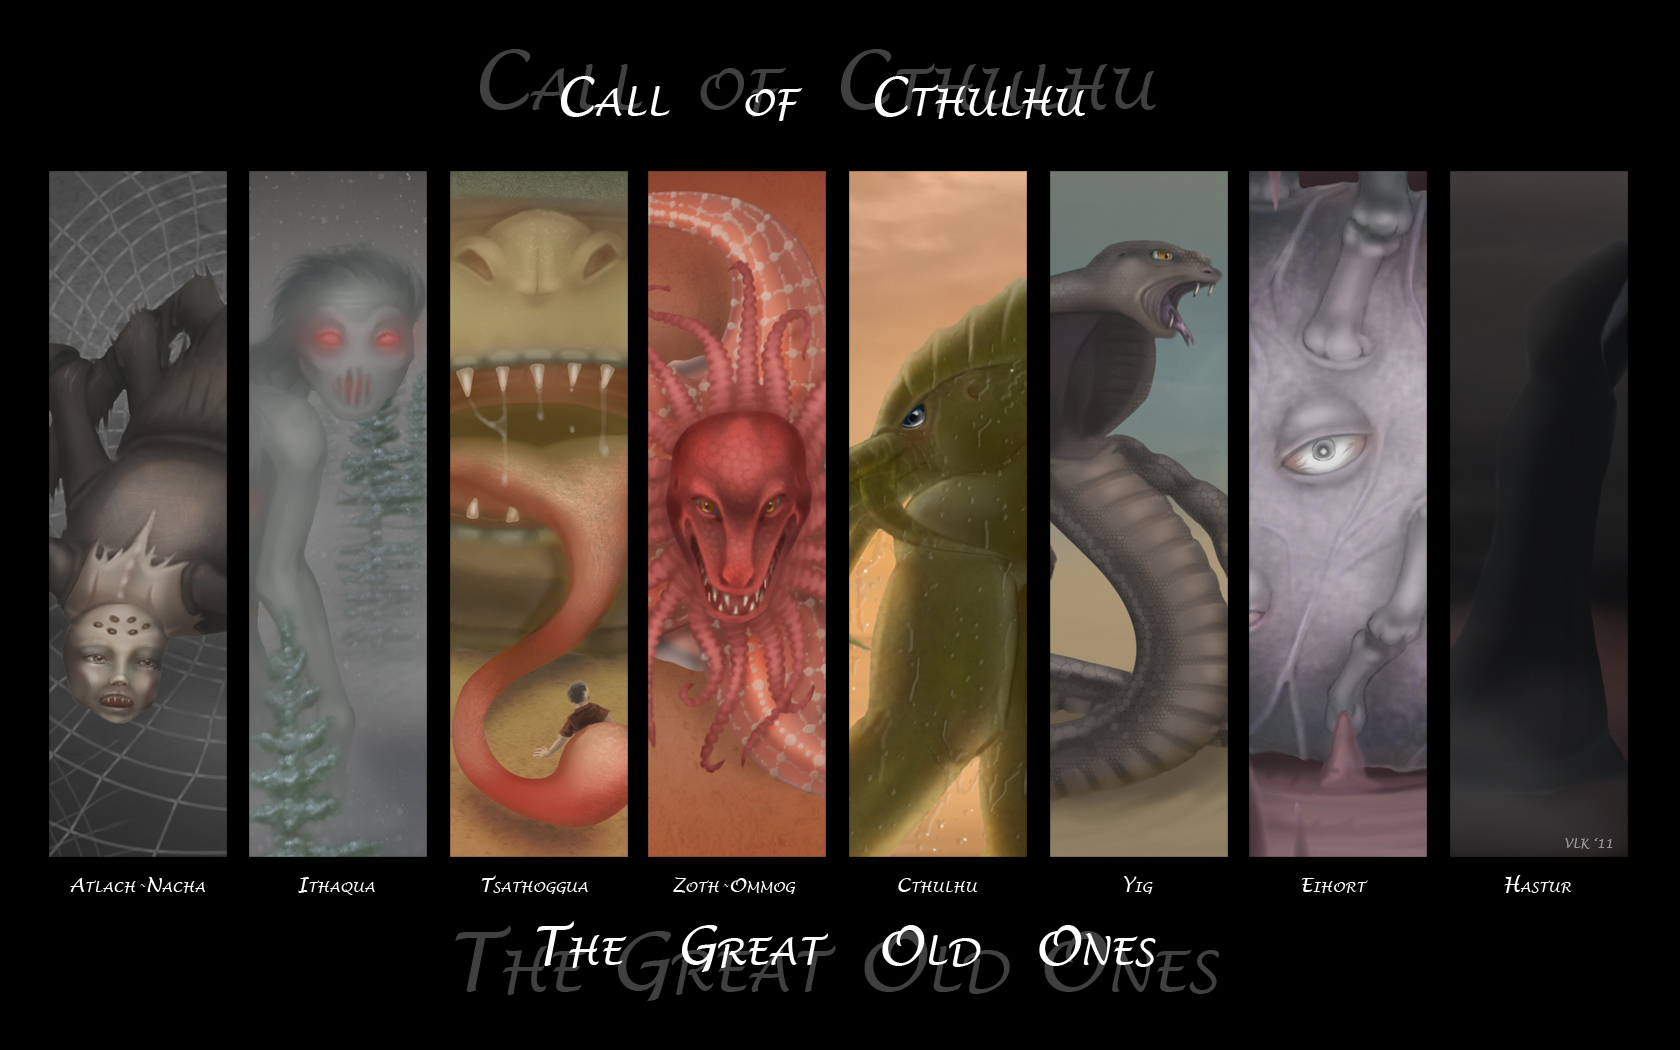 Cute Cthulhu Wallpaper The Call Of S HD Walls Find